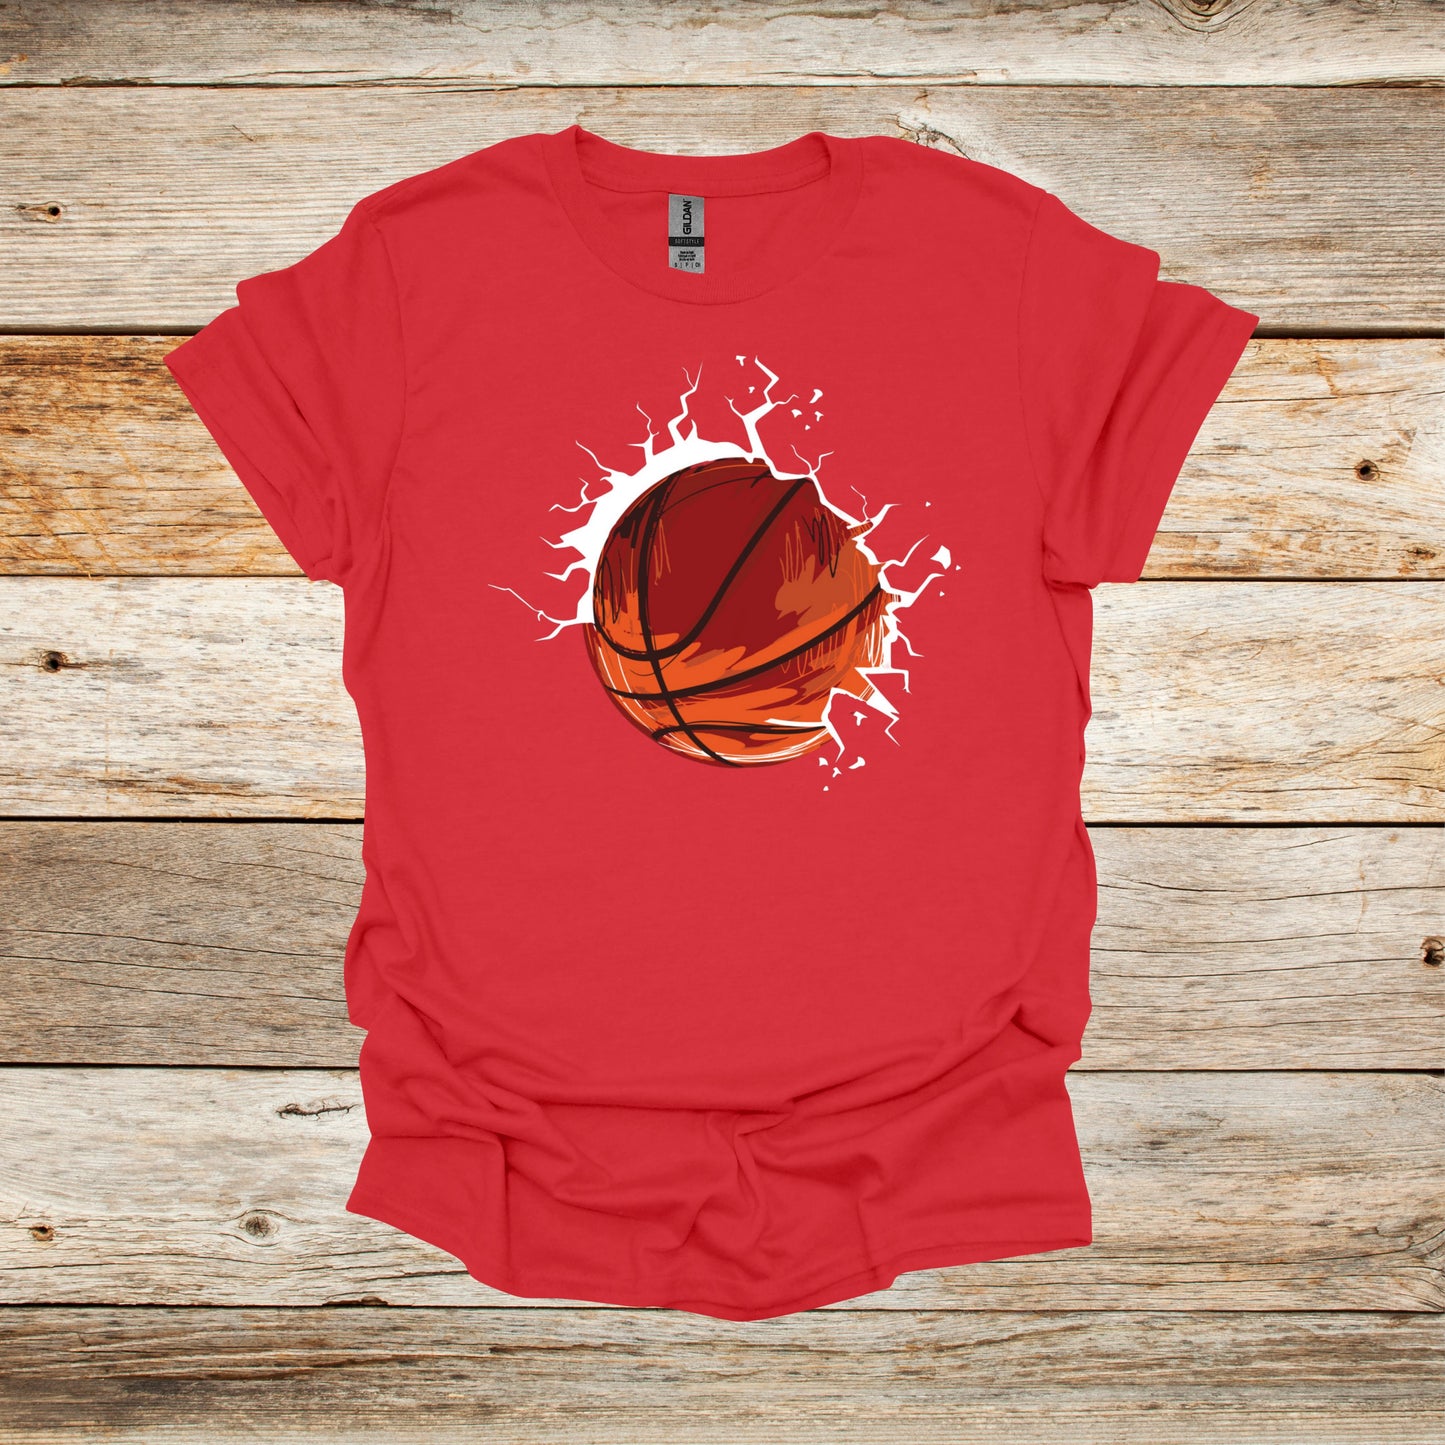 Basketball T-Shirt - Adult and Children's Tee Shirts - Sports T-Shirts Graphic Avenue Red Adult Small 